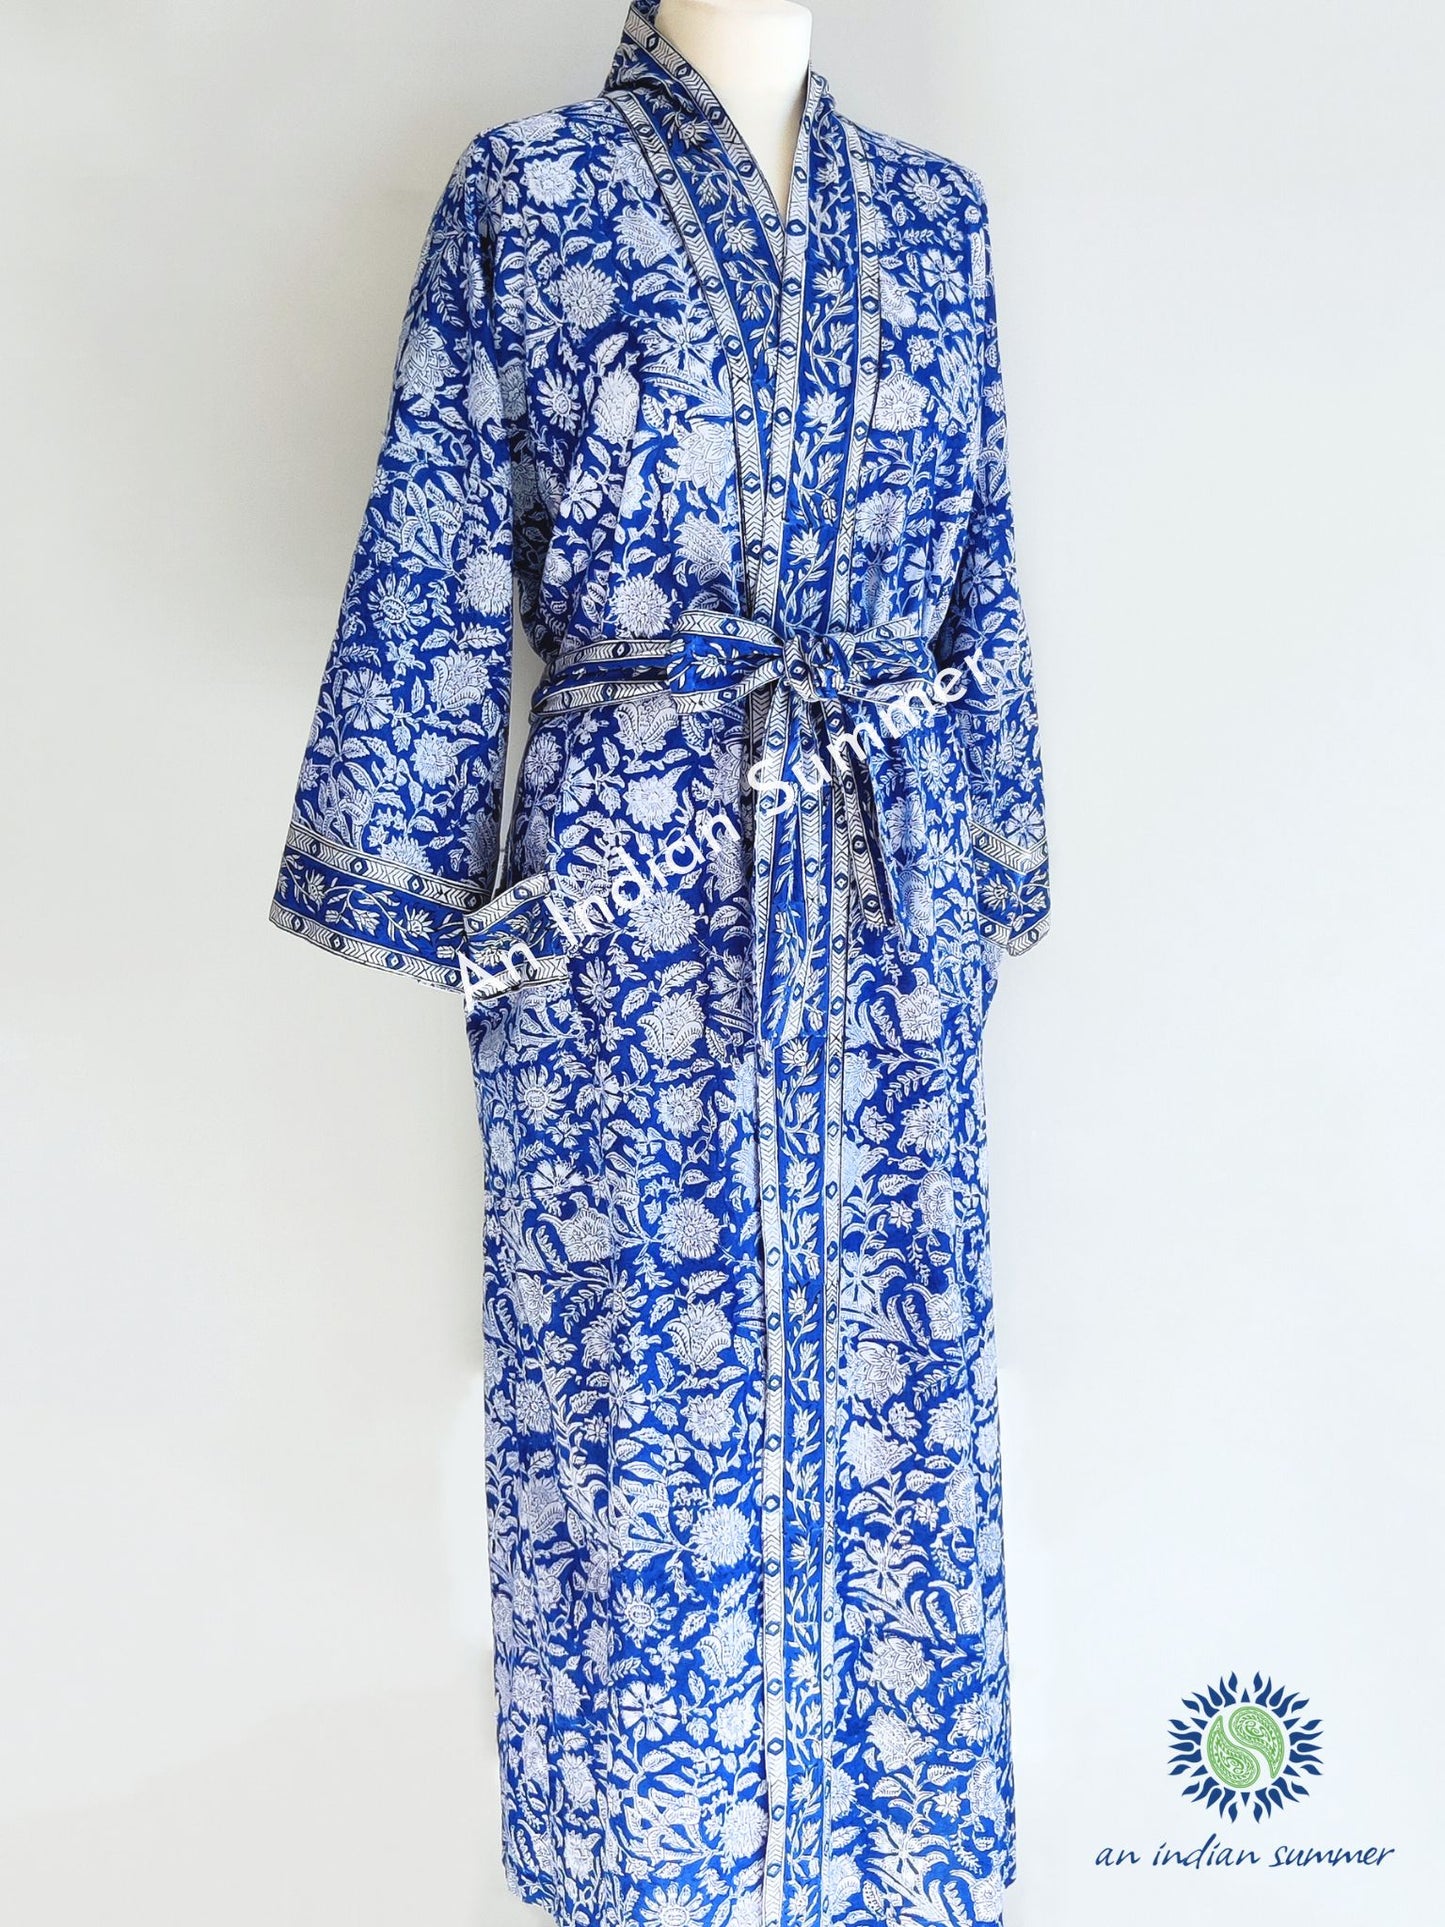 Long Kimono Robe | Meadow | Shades of Blue | Floral Block Print | Hand Block Printed | Cotton Voile | An Indian Summer | Seasonless Timeless Sustainable Ethical Authentic Artisan Conscious Clothing Lifestyle Brand